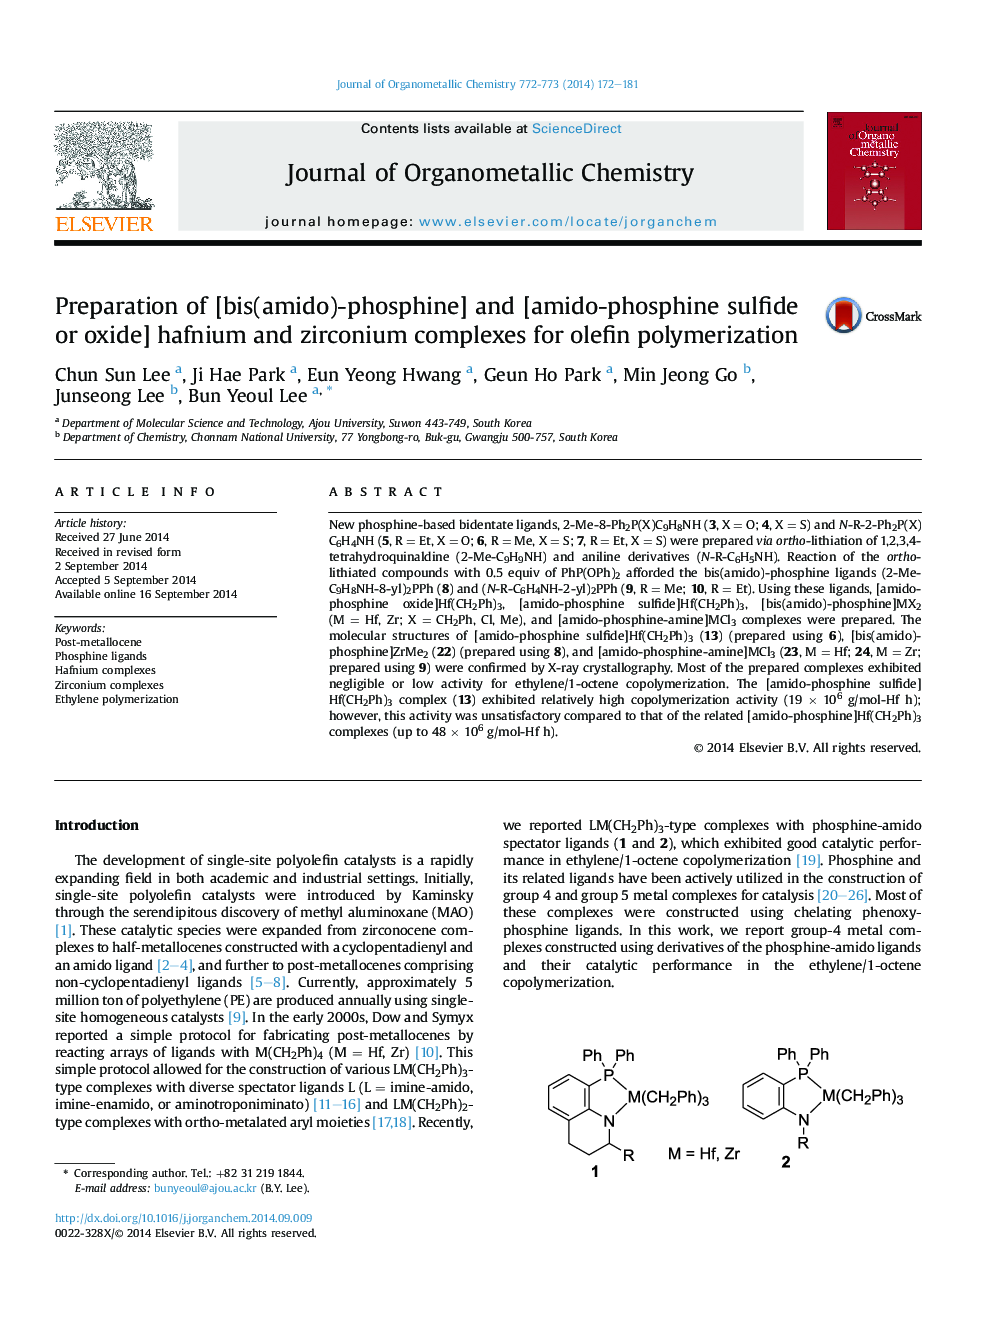 Preparation of [bis(amido)-phosphine] and [amido-phosphine sulfide or oxide] hafnium and zirconium complexes for olefin polymerization